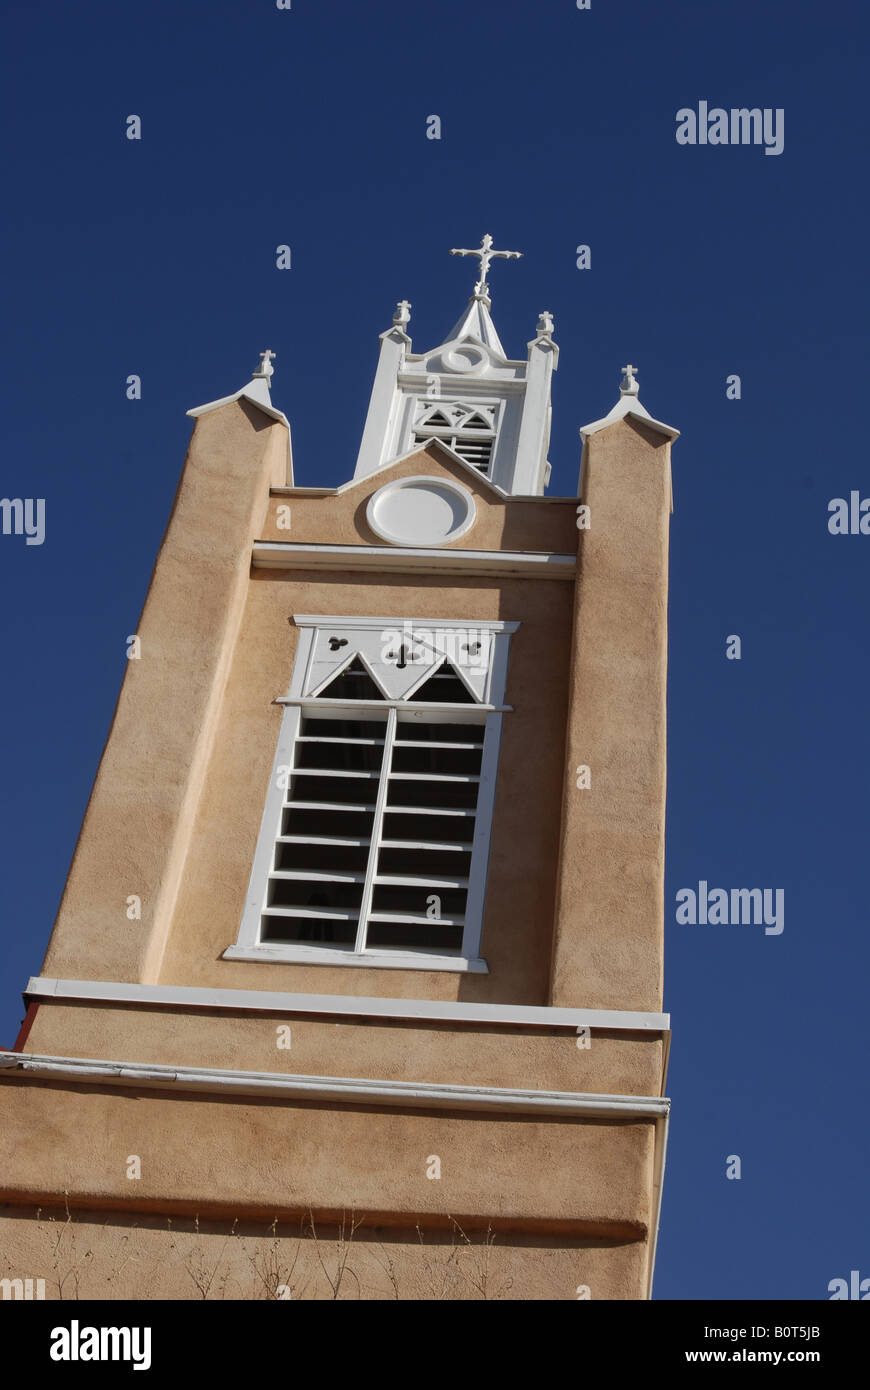 One of the towers of San Felipe de Neri Catholc Church in the old town area of Albuquerque New Mexico Stock Photo